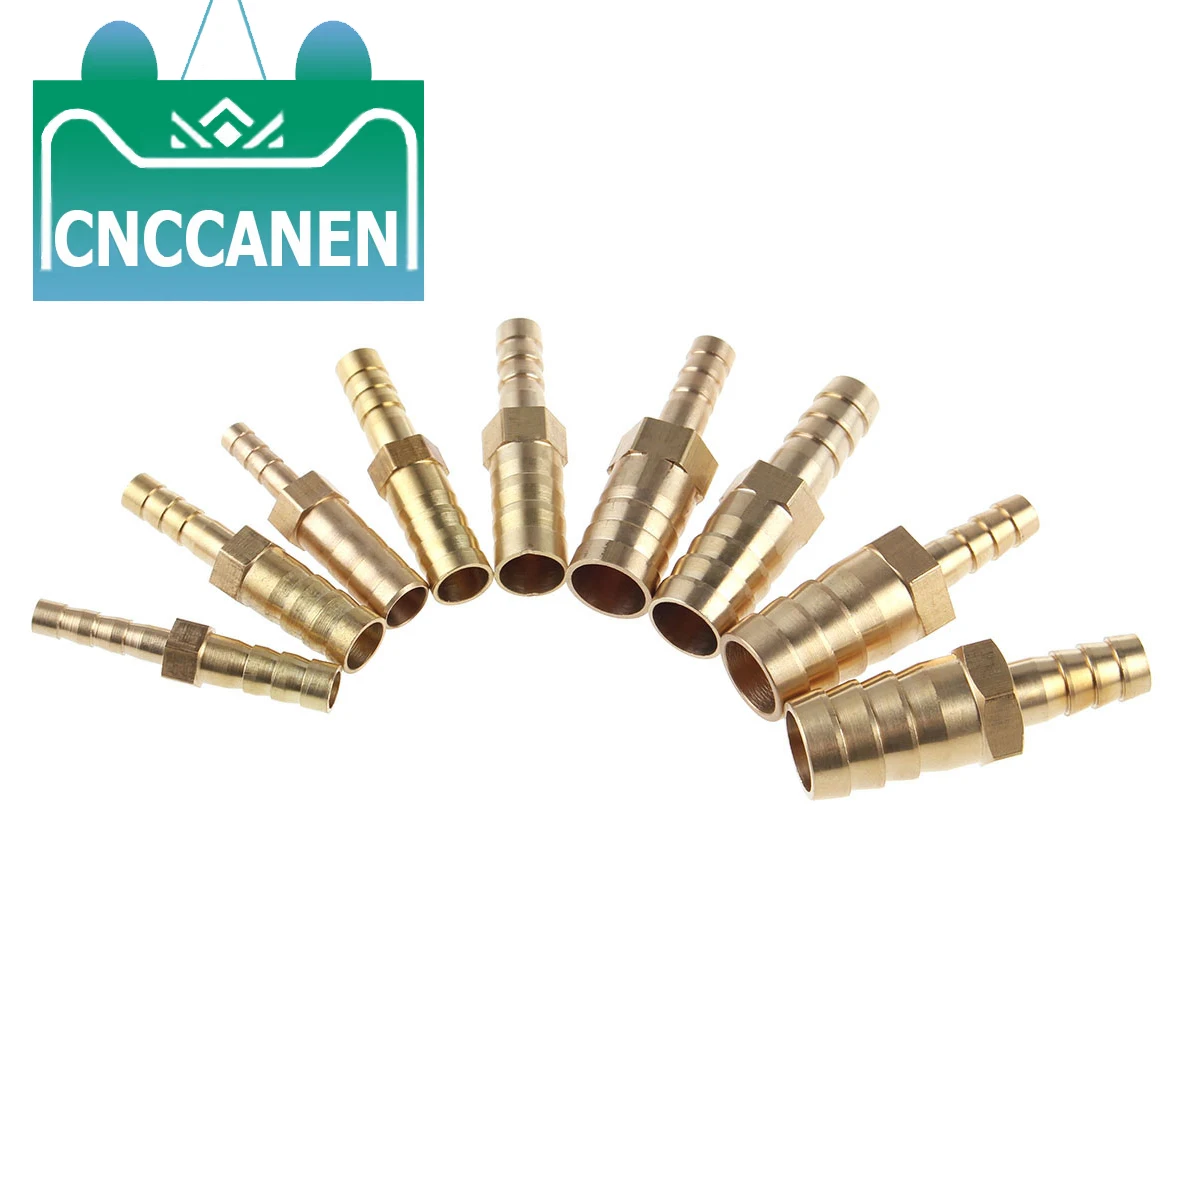 

Brass Reducing Straight Hose Barb 2 Way Pipe Fitting Reducer Copper Joiner Splicer Connector Coupler Adapter For Fuel Gas Water